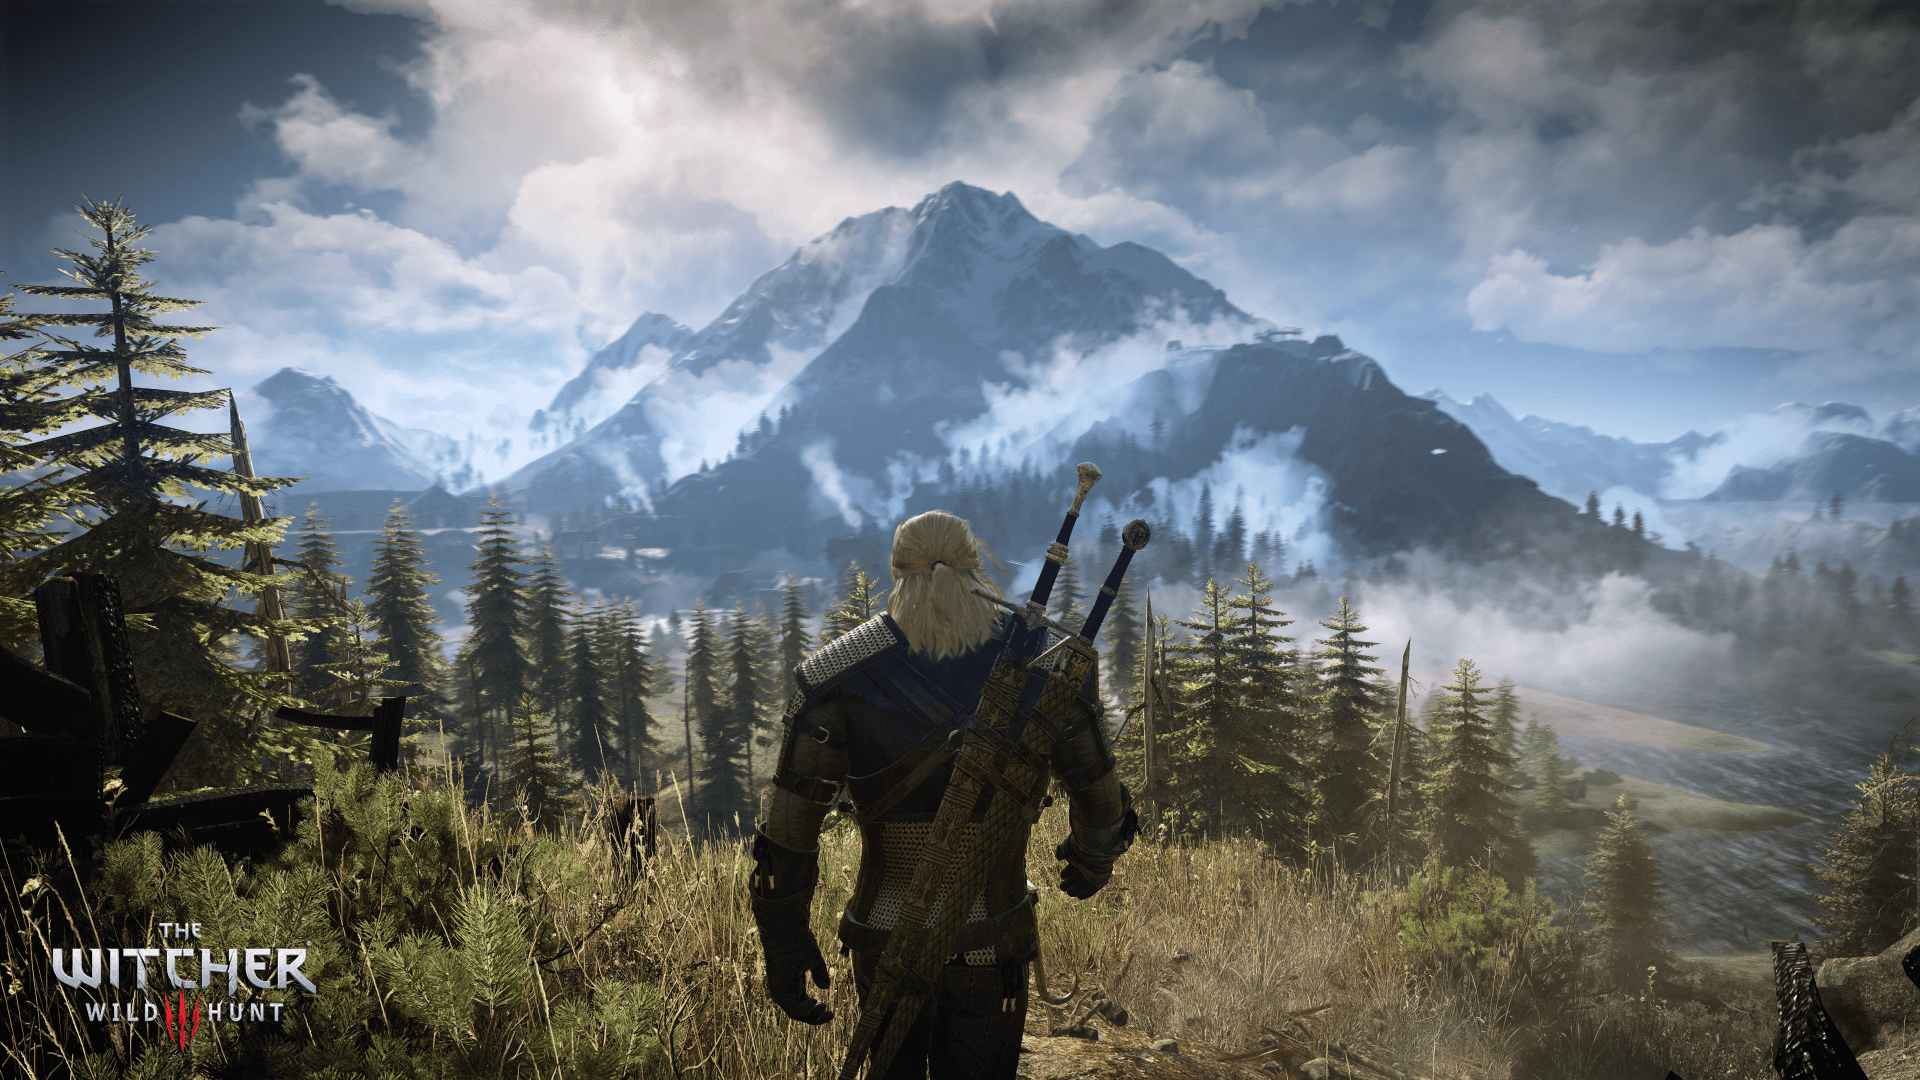 Enjoy the beauty of the Northern Kingdoms in The Witcher 3.